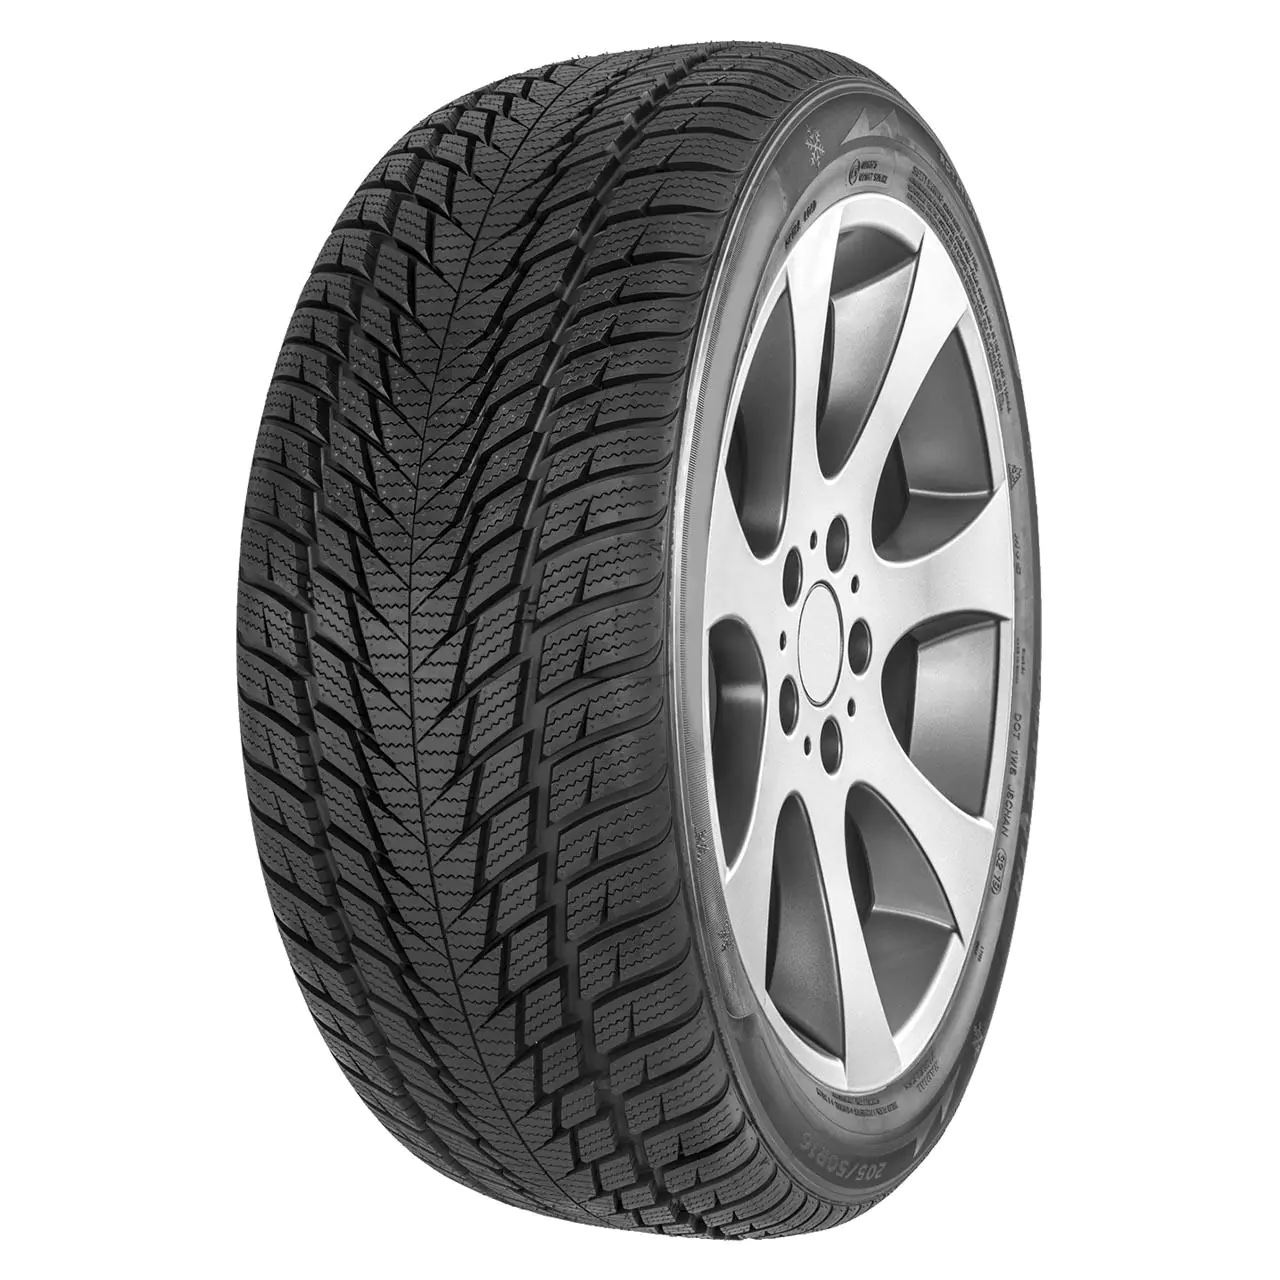 Gomme Autovettura Fortuna 215/40 R17 87V GOWIN UHP2 XL M+S Invernale